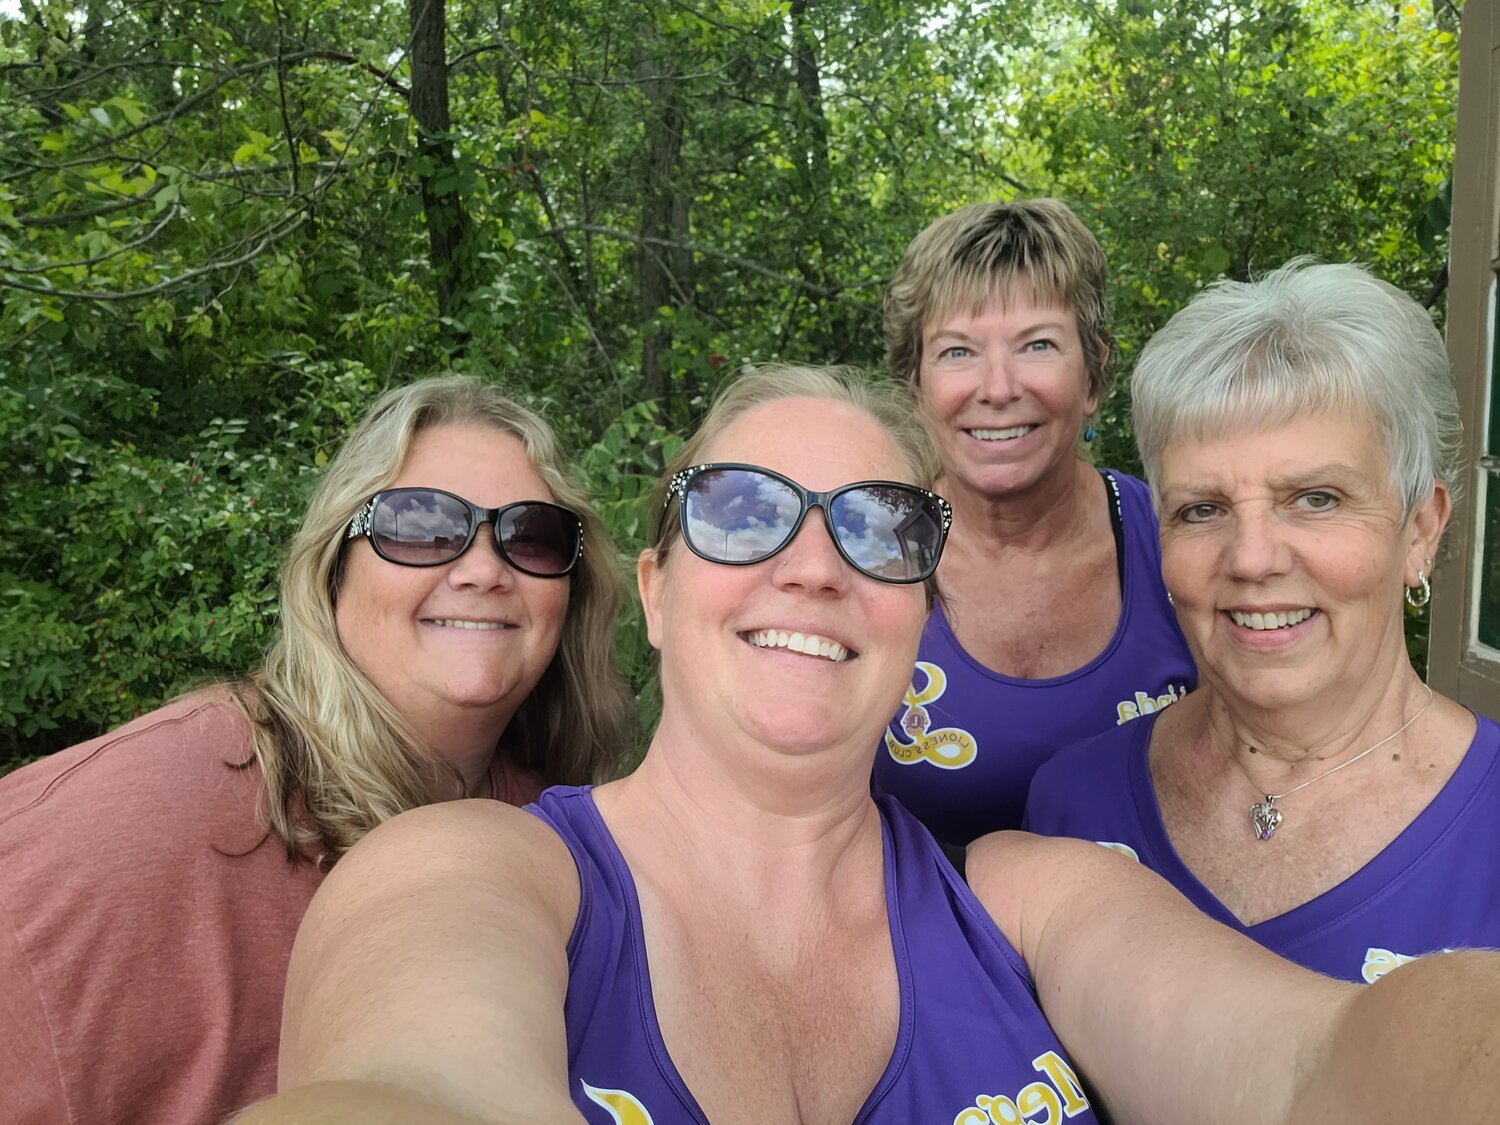 Selfie time out from parking cars at the Wabasha fair. Back row Erin Shaw and Linda Arendt. Front row Megan Richardson and Arlys Schmidt.